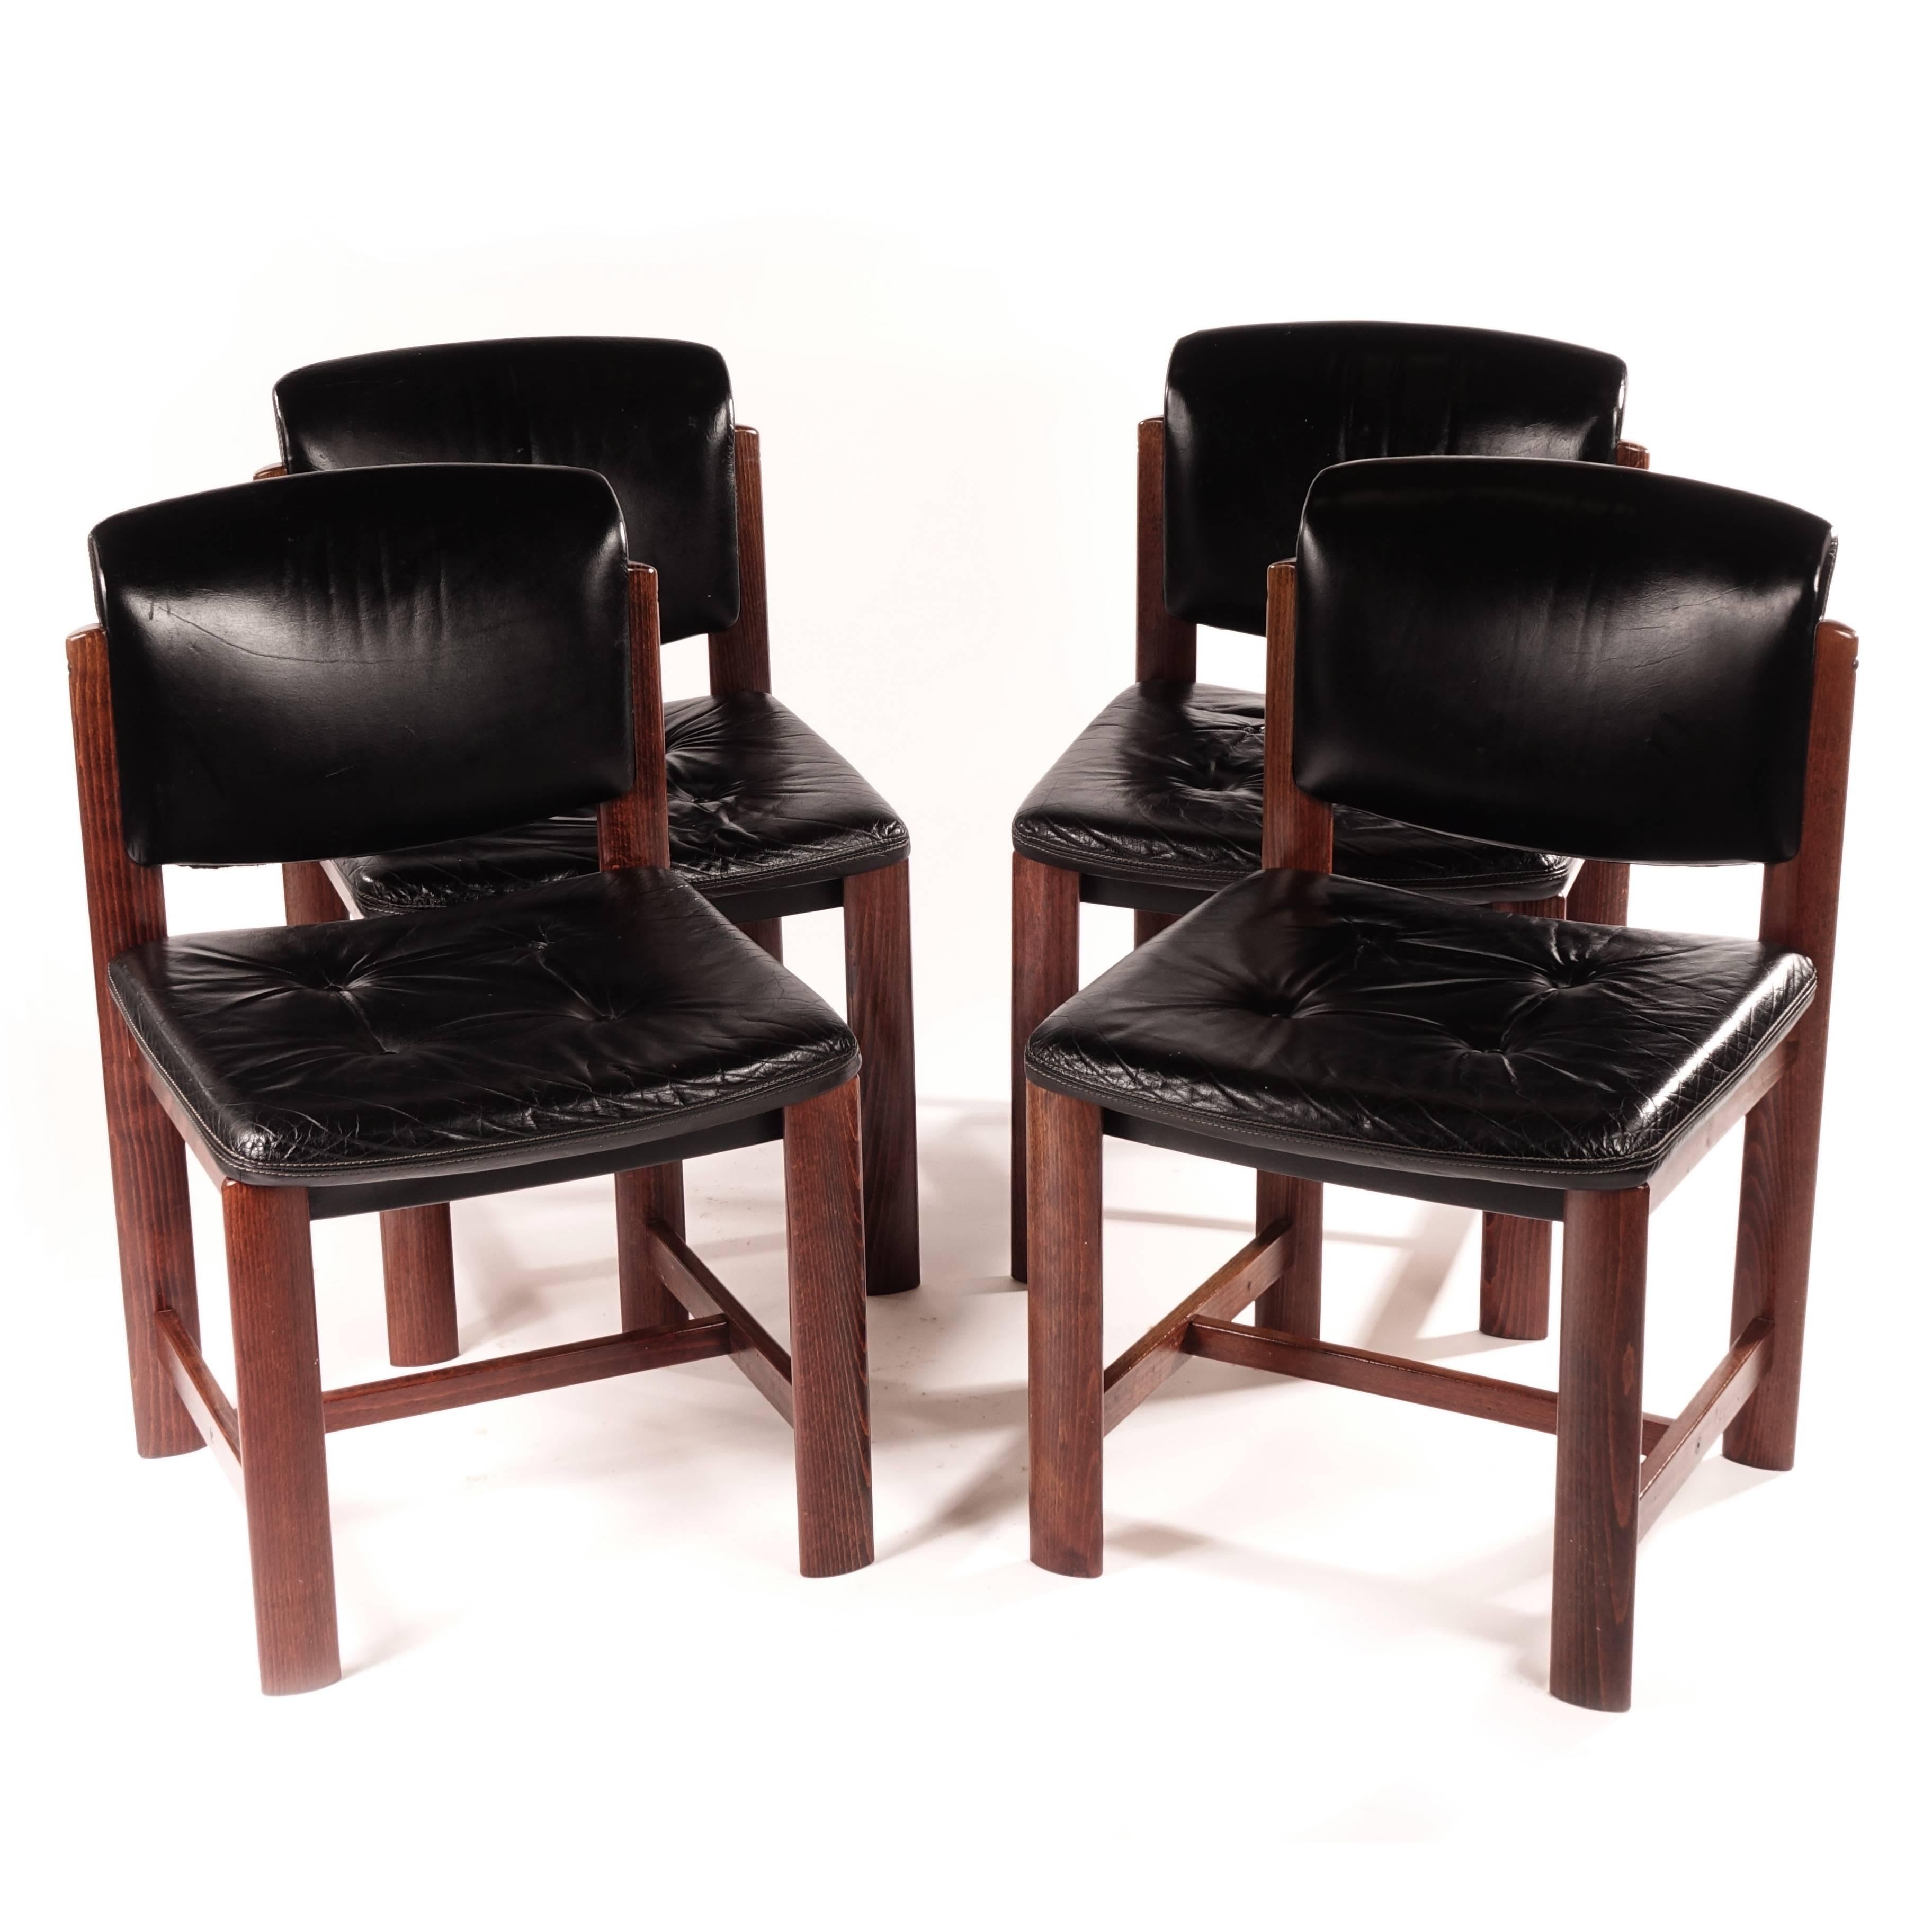 Scandinavian Modern Swedish Leather Chairs from 1960s with Teak Legs For Sale